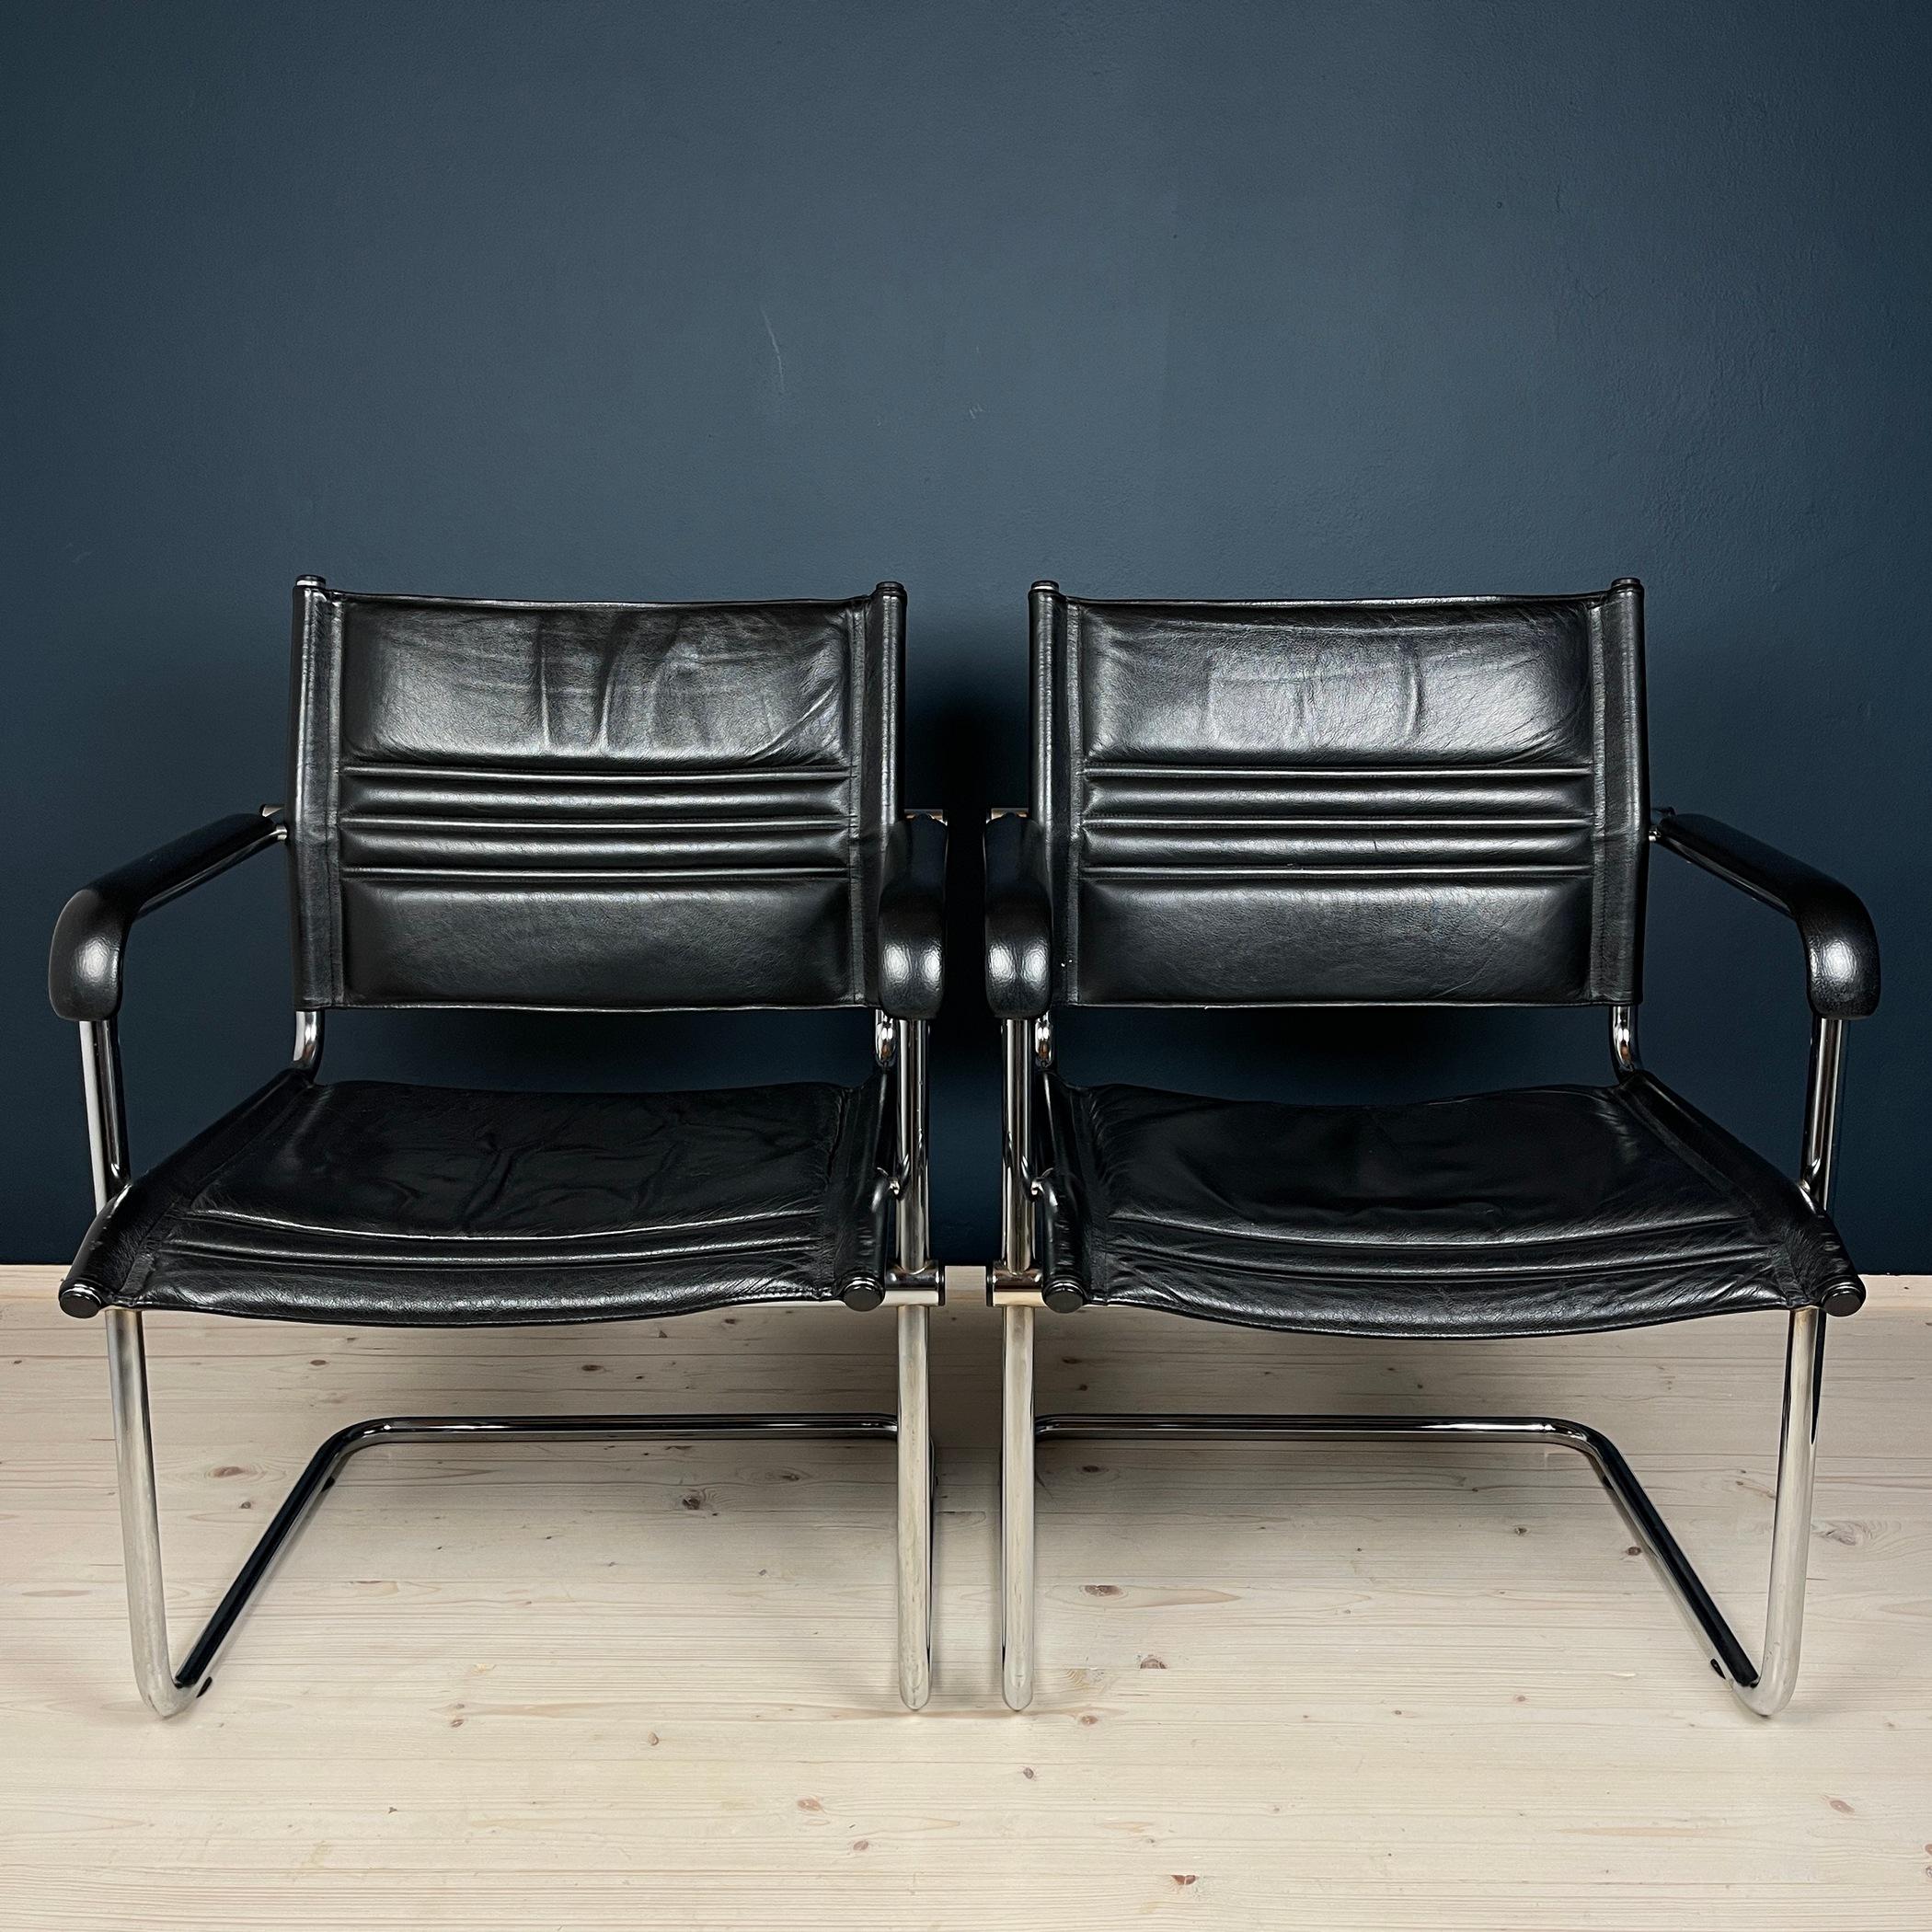 A pair of beautiful office chairs by Stol Kamnik were made in the mid-80s in Yugoslavia (designed by Mart Stam). Mart Stam is a famous Dutch architect and designer who worked in the Bauhaus style. He developed several models of cantilever chairs,